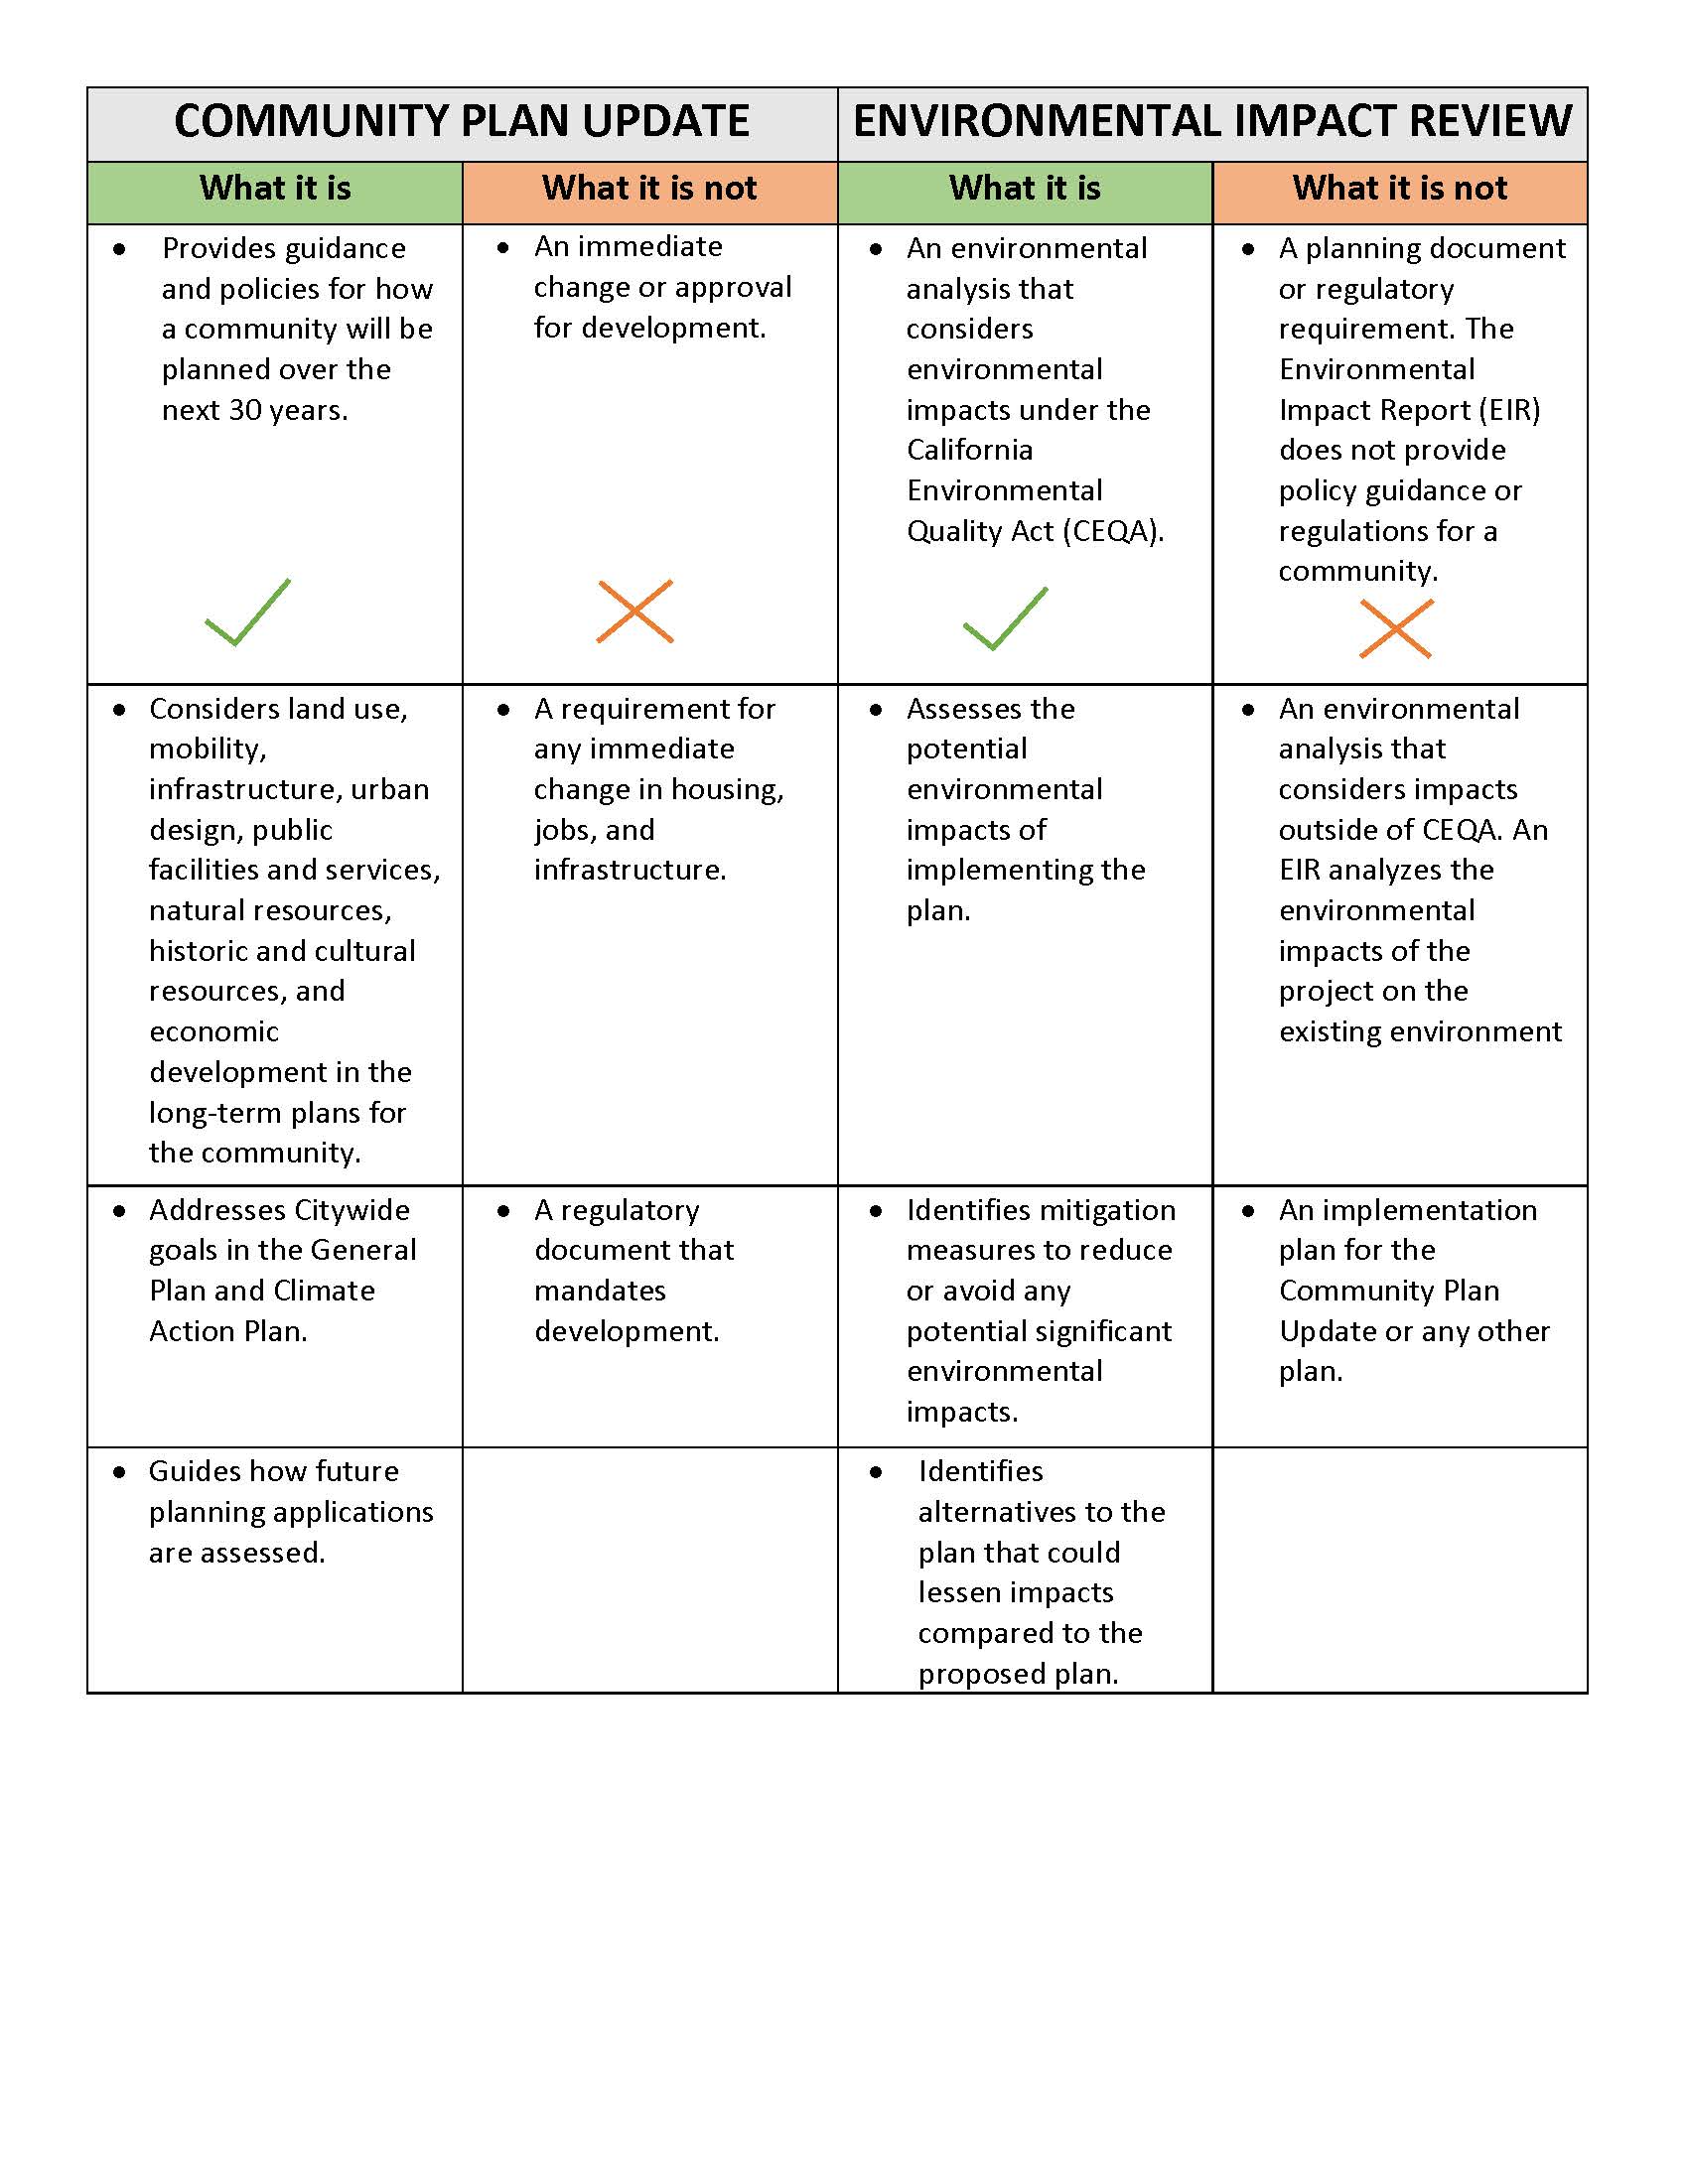 Table describing Community Plans and Environmental Impact Review